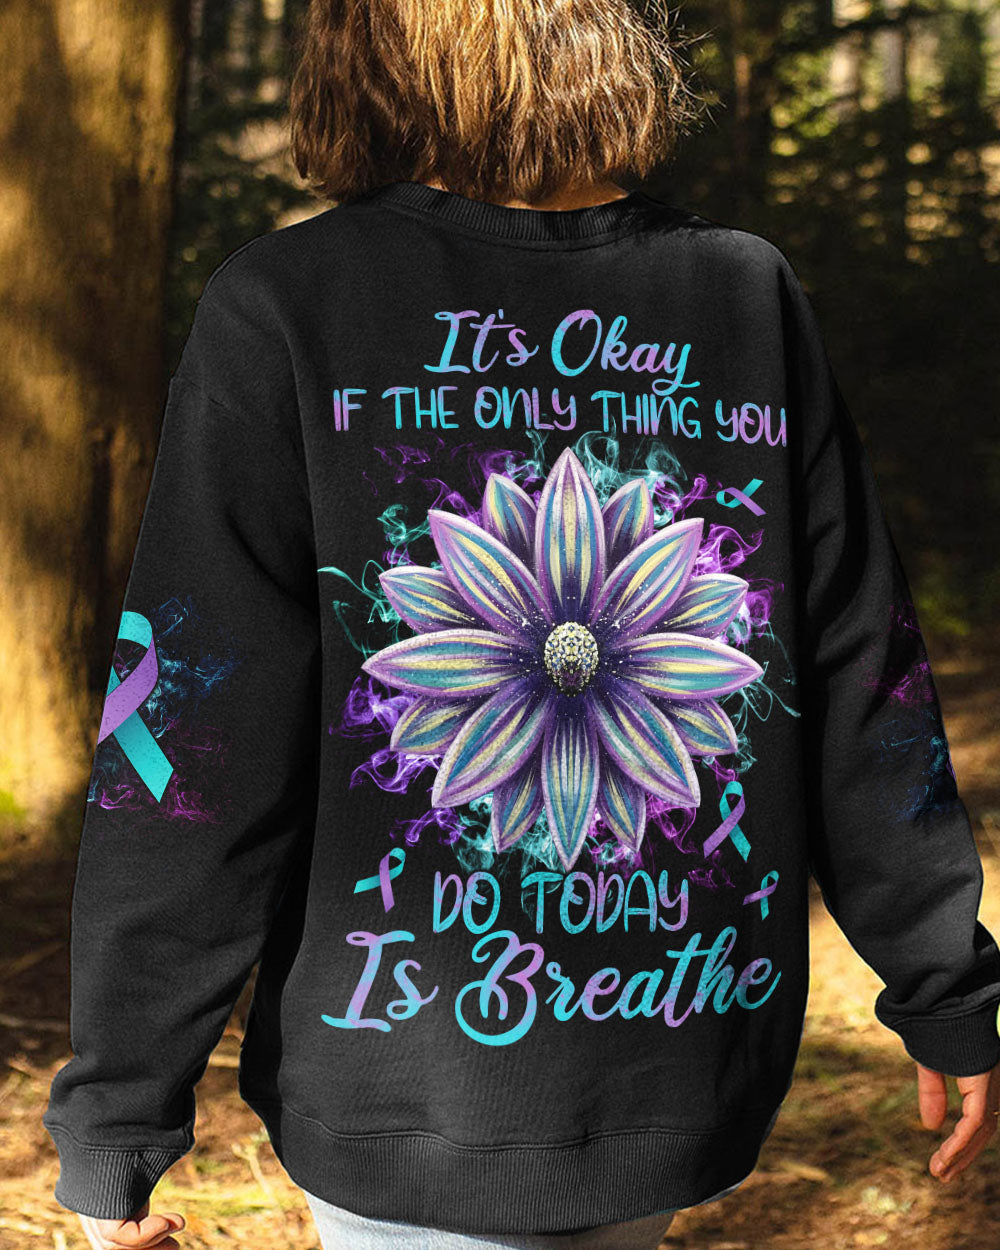 It's Okay If The Only Thing You Can Do Today Is Breathe Flower Women's Suicide Prevention Awareness Sweatshirt